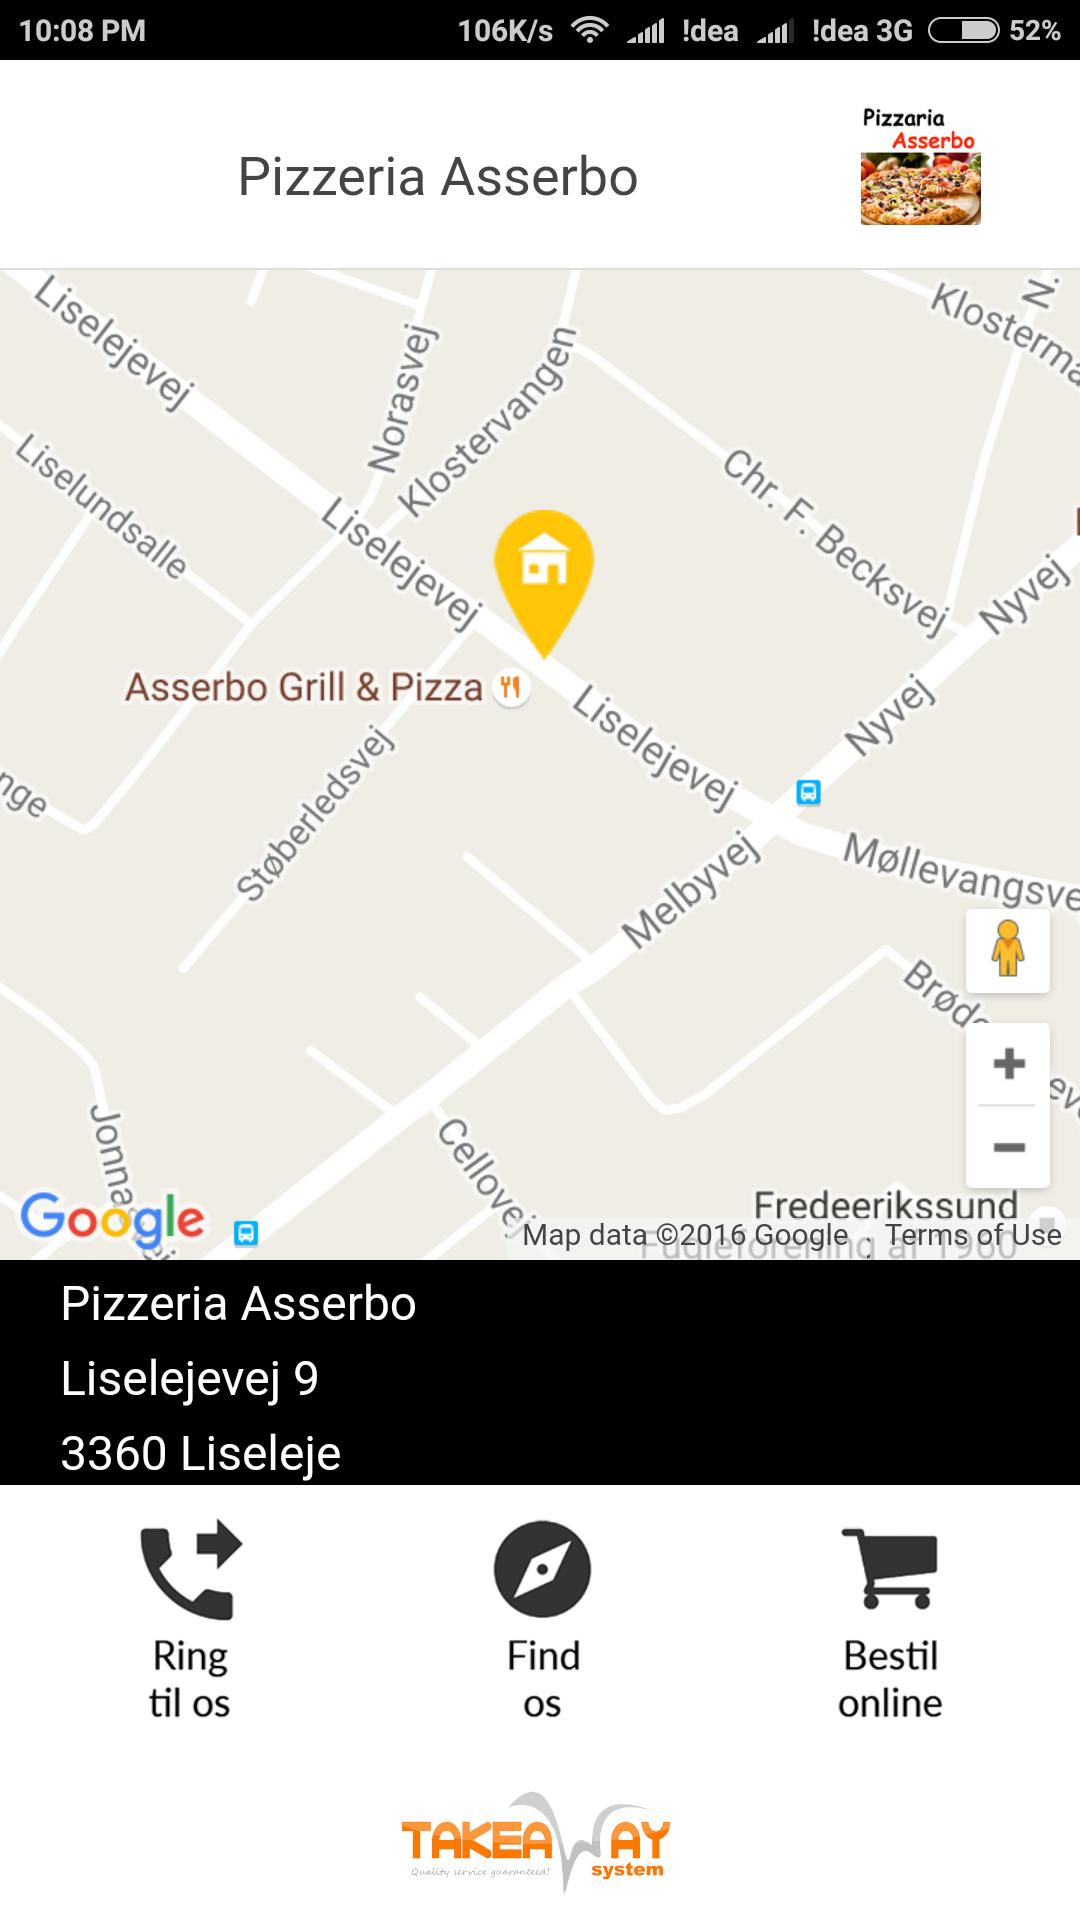 Pizzeria Asserbo Liseleje for Android - APK Download